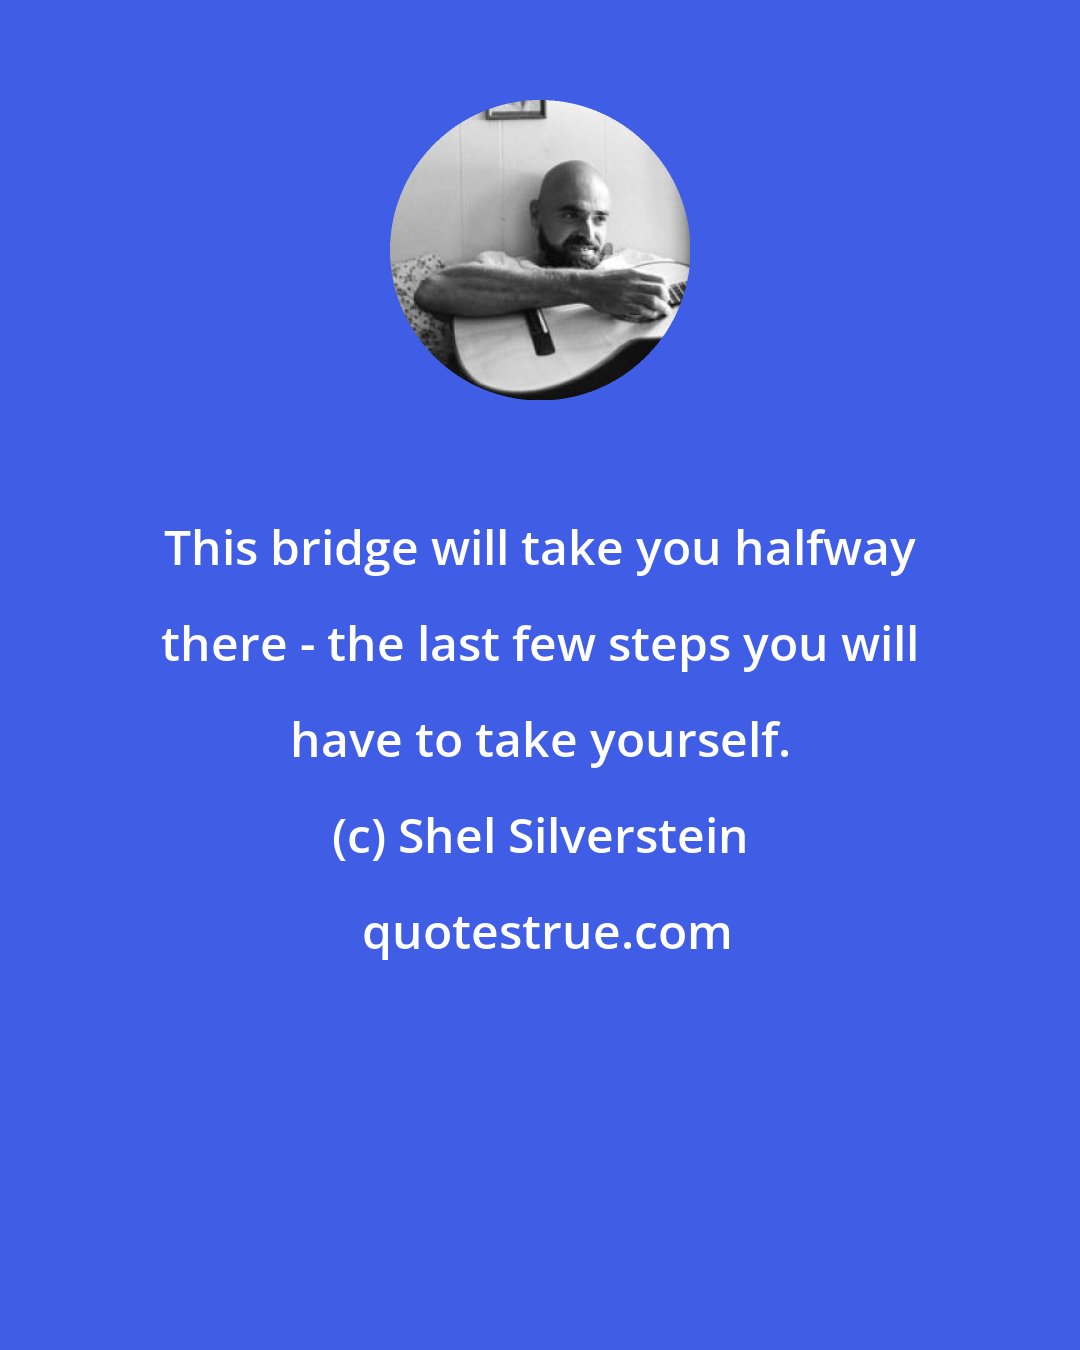 Shel Silverstein: This bridge will take you halfway there - the last few steps you will have to take yourself.